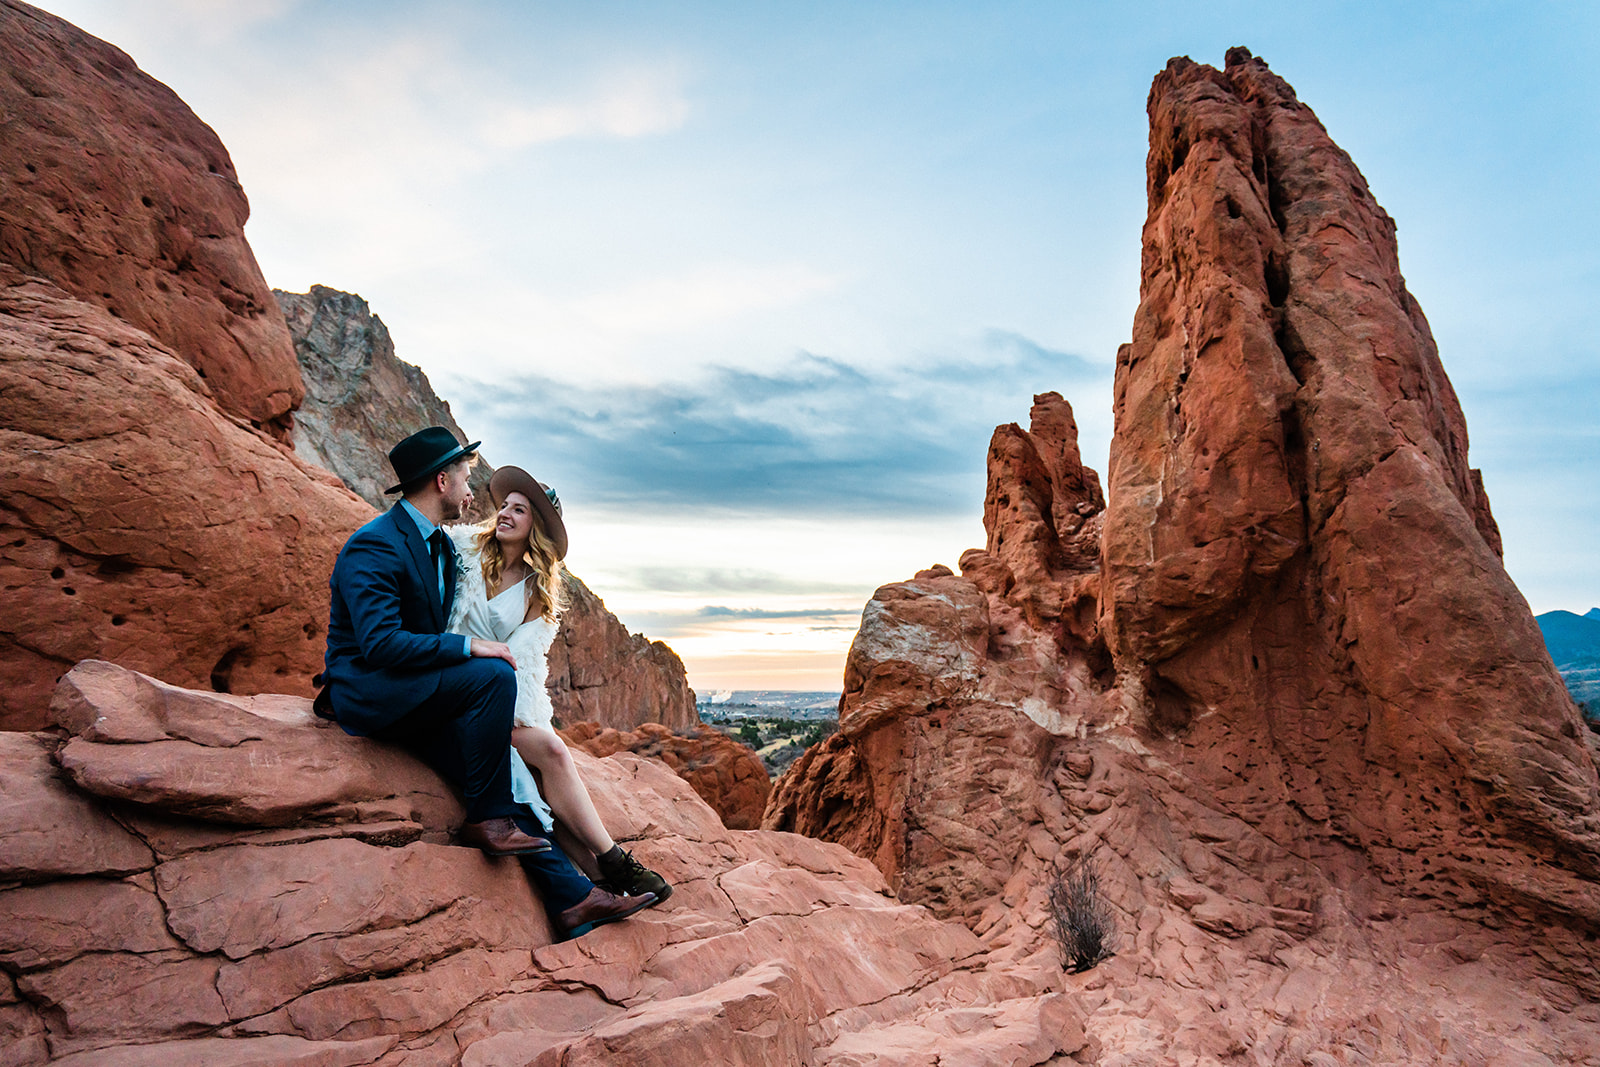 A couple in stylish attire smiles at one another and sits on a rocky outcrop near the landmark Sleeping Giant in Garden of the Gods during their Colorado Springs adventure photography session.